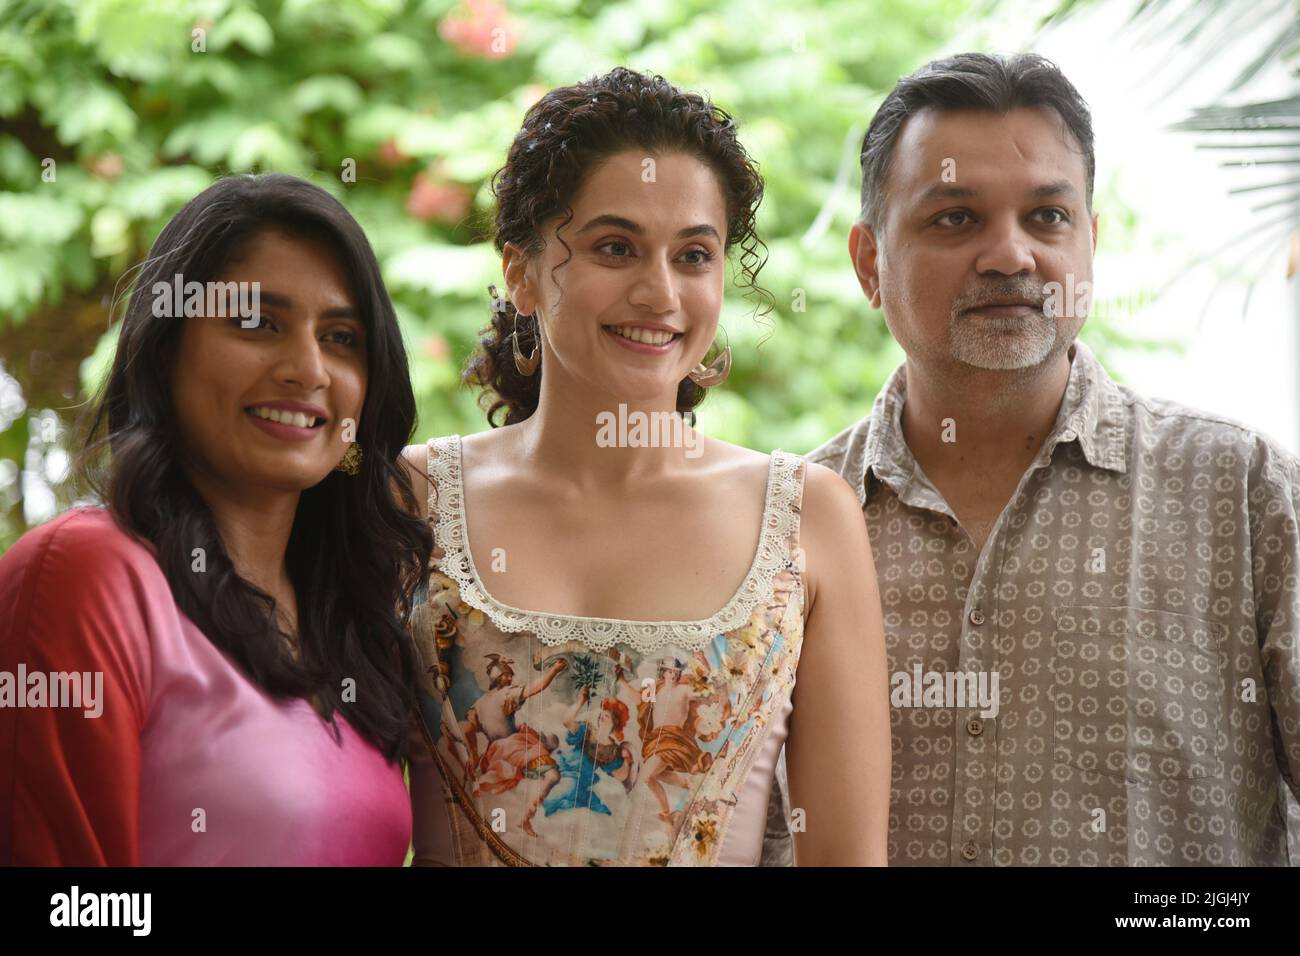 Bollywood star Taapsee Pannu (center) with Director Srijit Mukherji (right) and Mithali Raj (left) poses for a photo in New Delhi. Taapsee plays the titular role in Shabaash Mithu, an upcoming Indian Hindi-language biographical sports drama film based on the life of former Test and One Day International (ODI) captain of the India women's national cricket team, Mithali Raj. (Photo by Sondeep Shankar/Pacific Press) Stock Photo